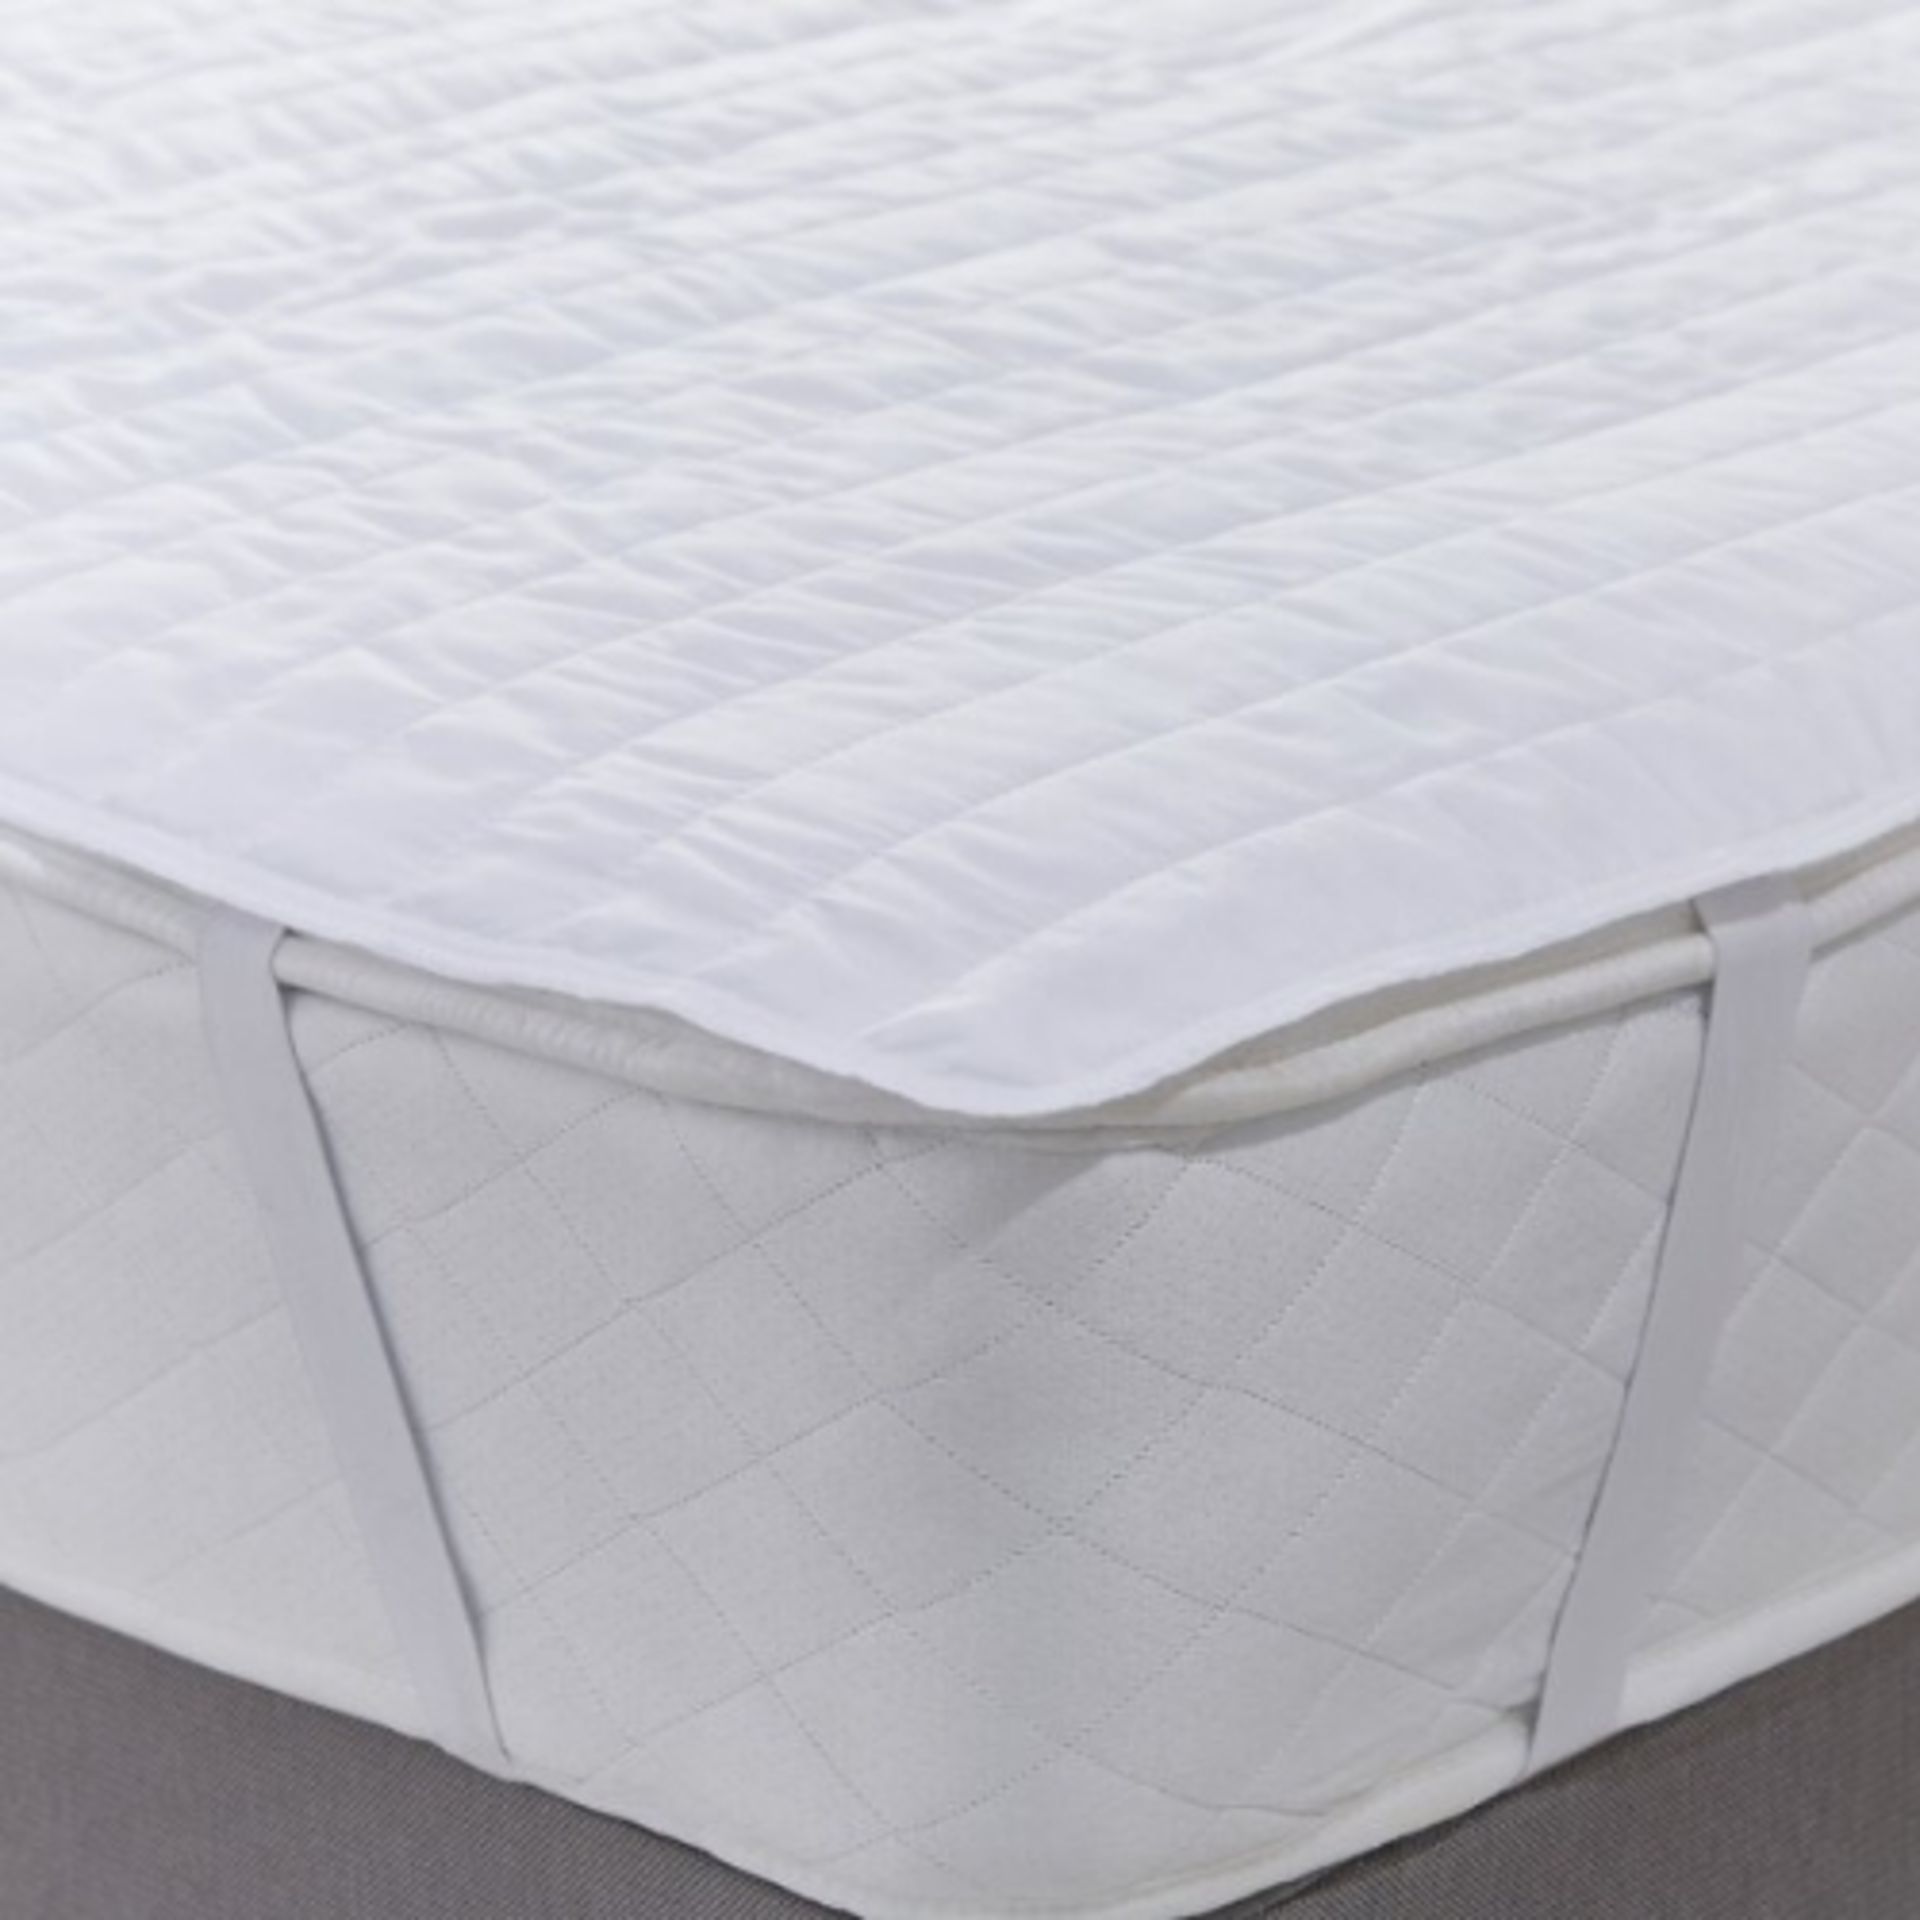 Quilted Hypoallergenic Mattress Protector - kingsize by Silentnight